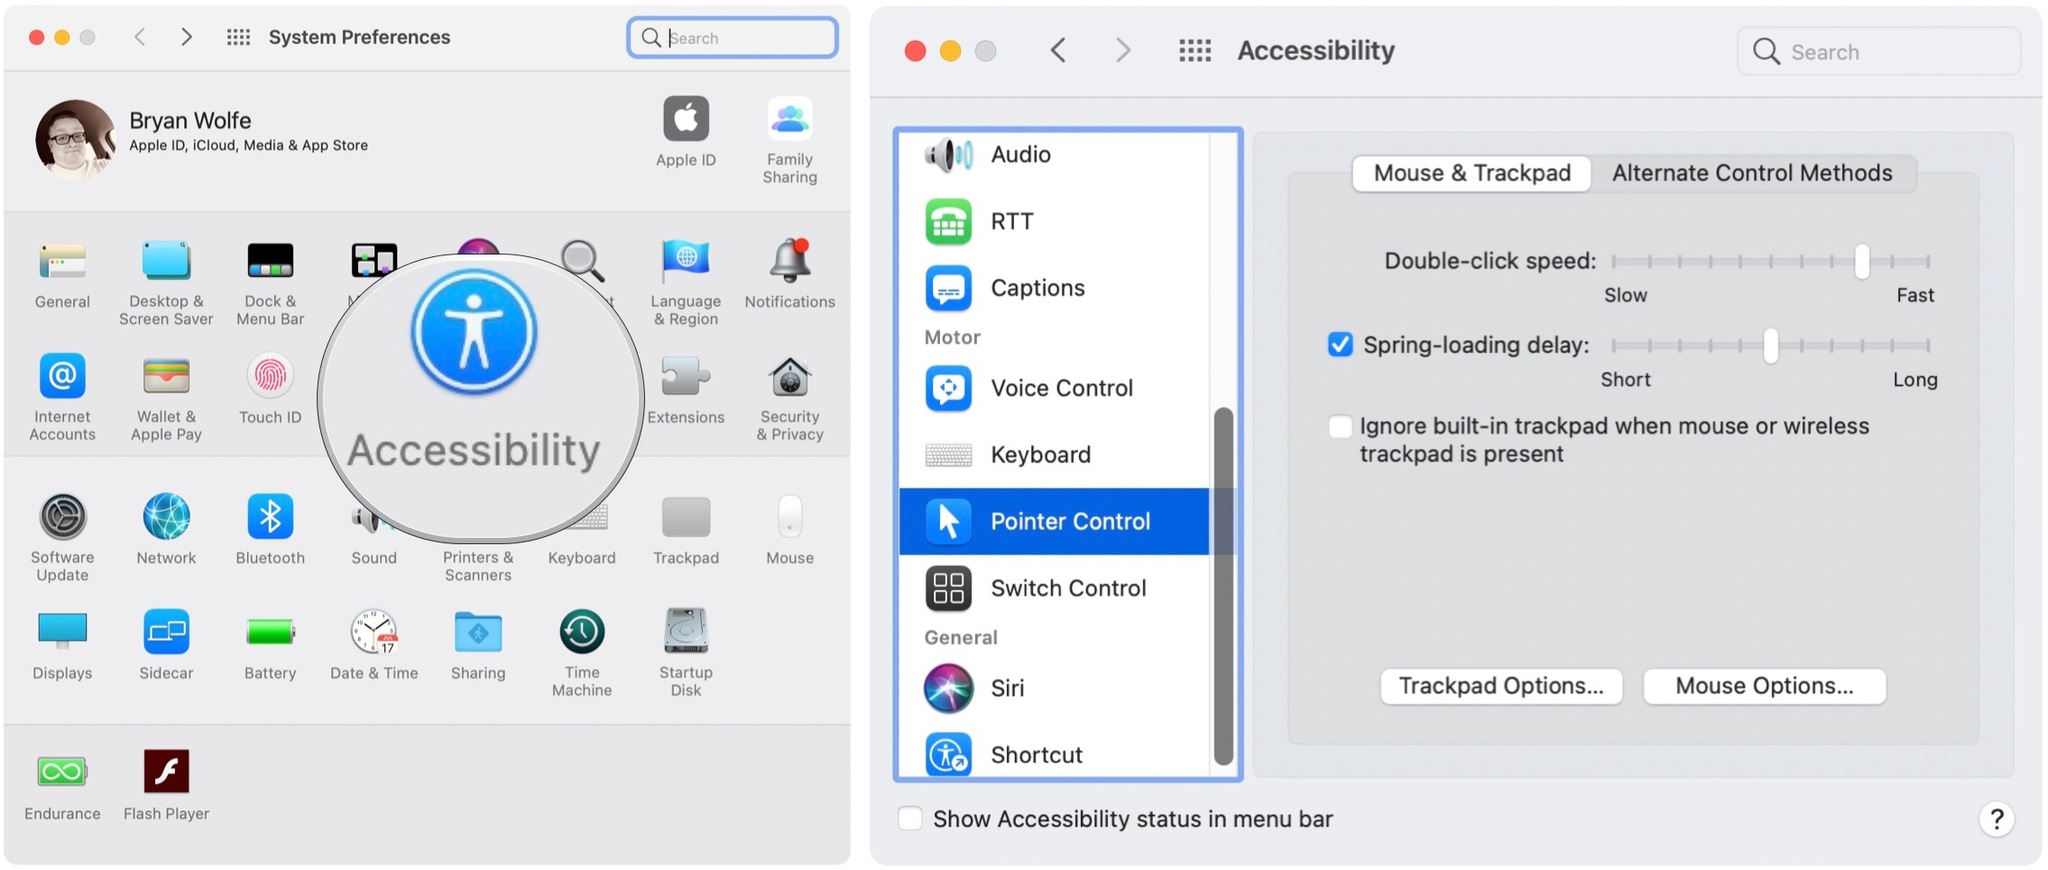 To speed up or slow down double-clicking on a Mac trackpad, click Accessibility, scroll down and click on Pointer Controls.